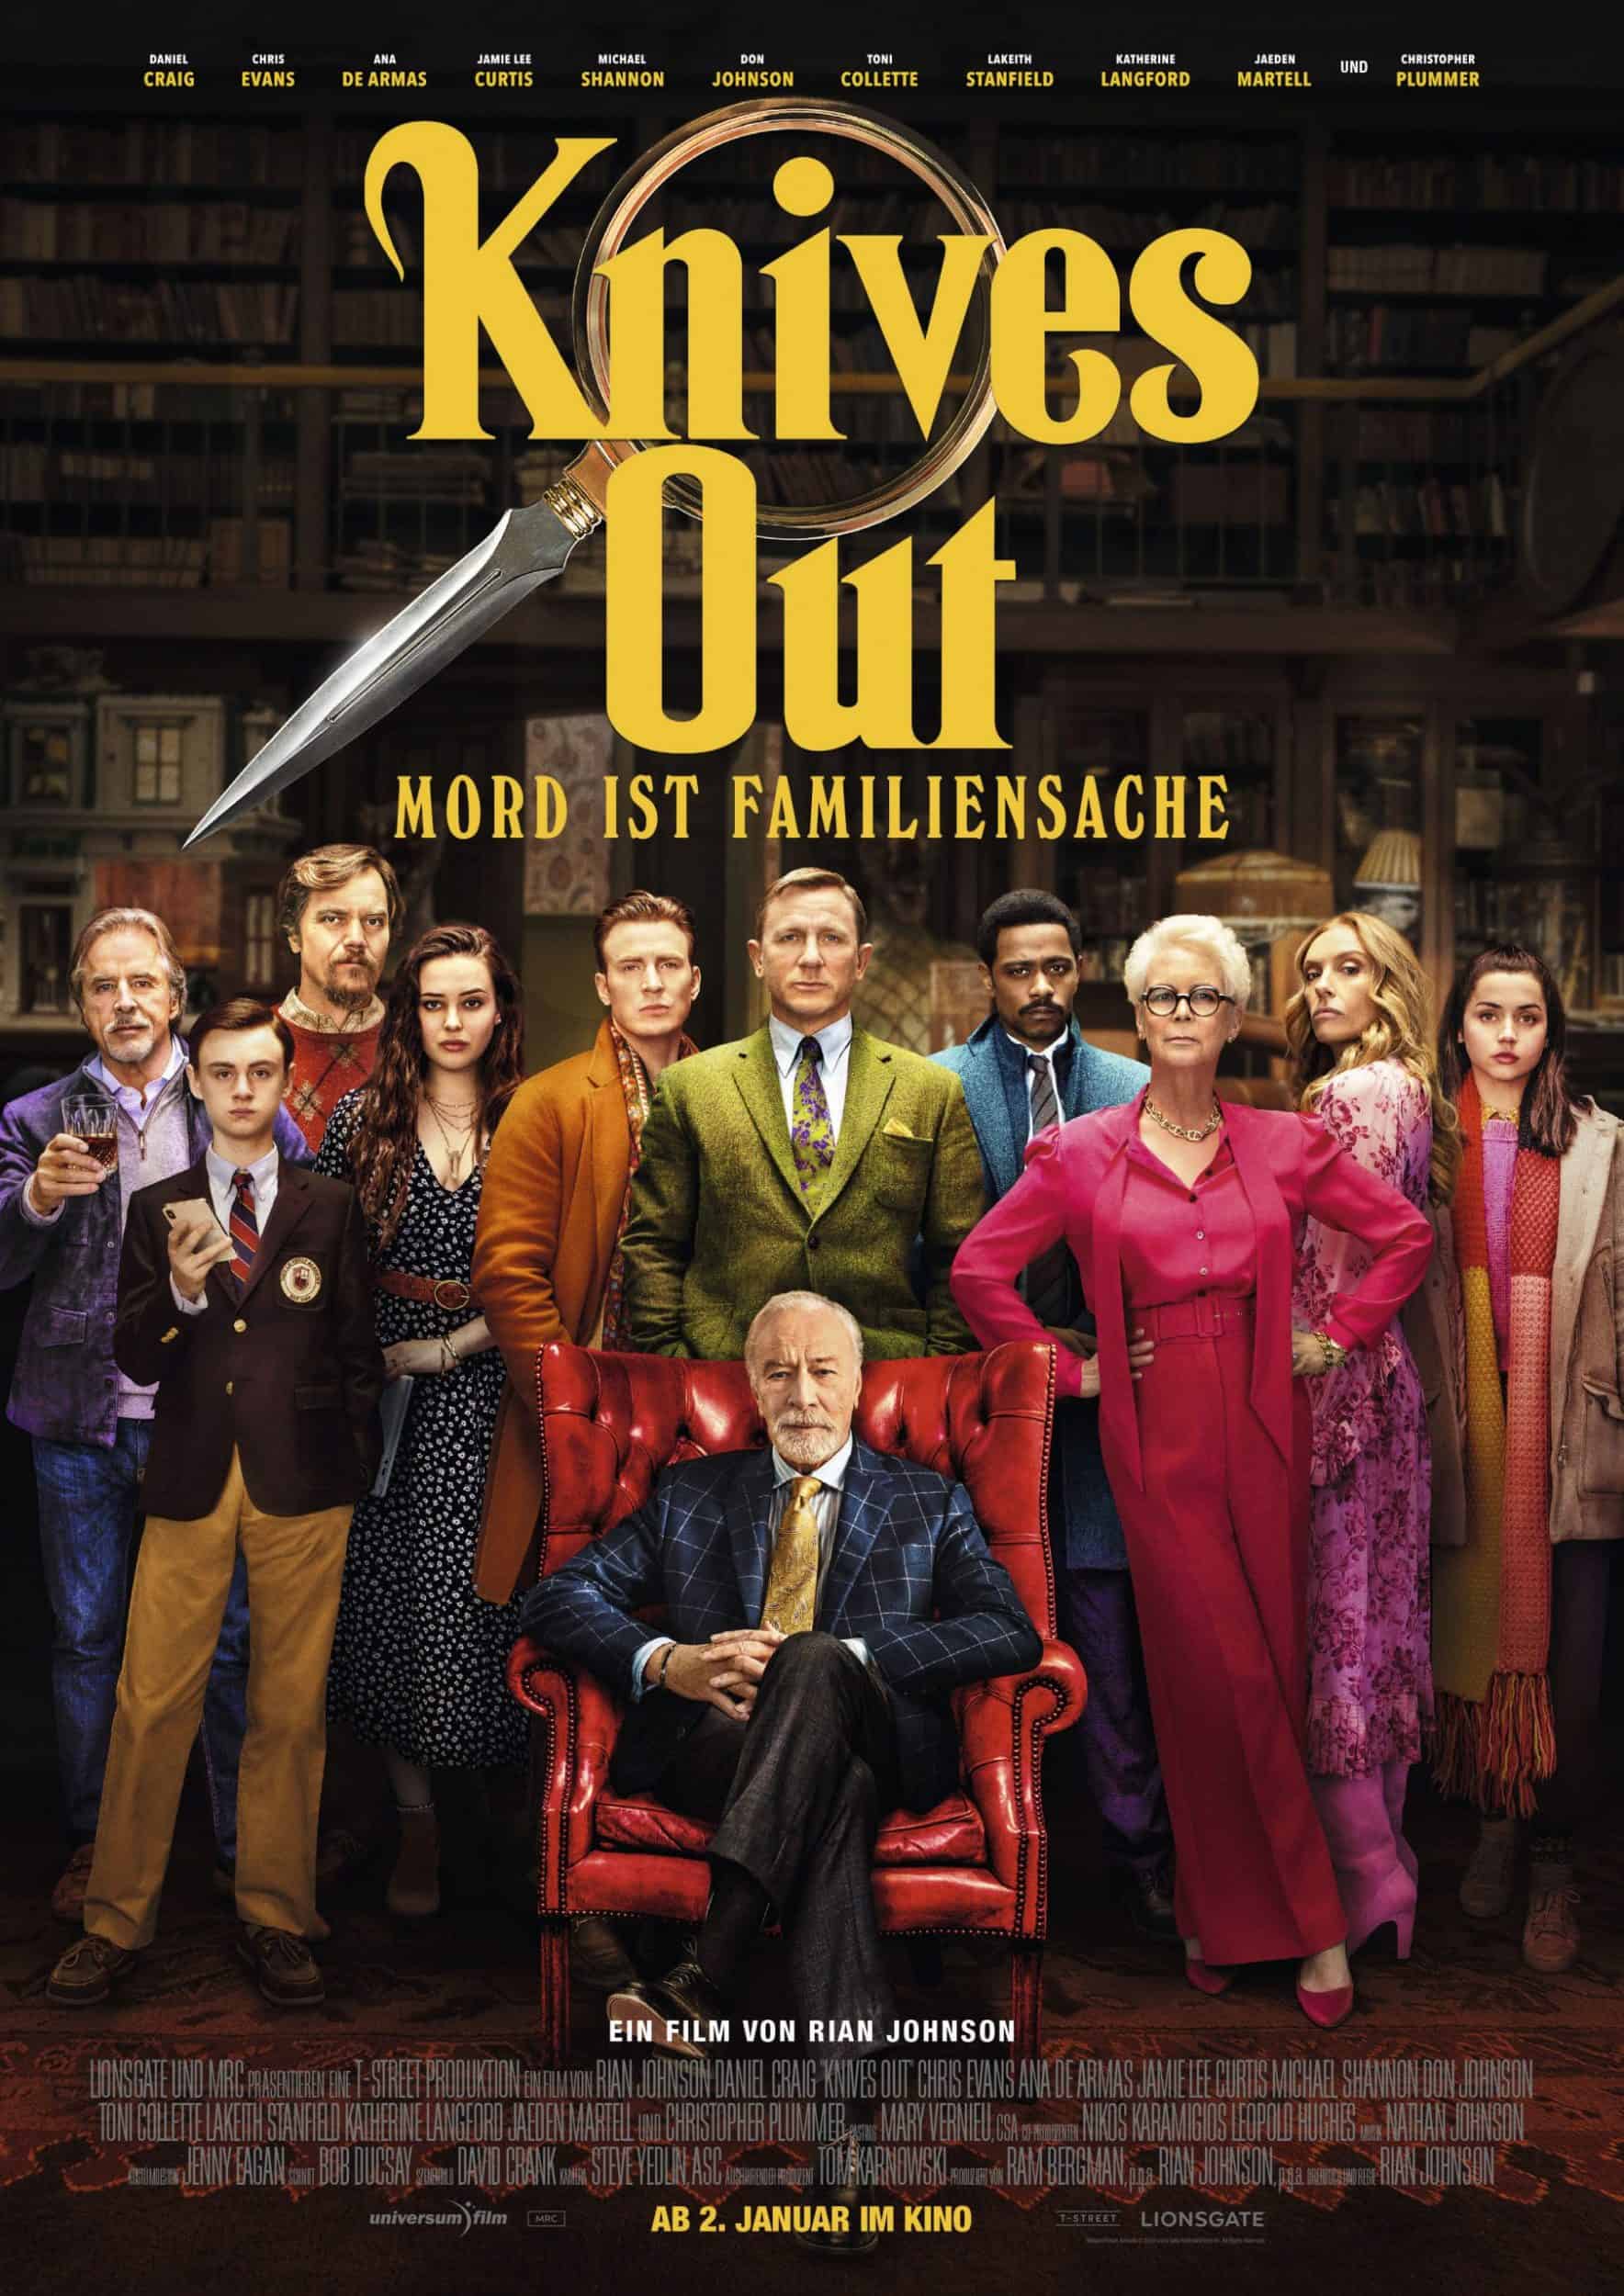 KNIVES OUT - MORD IST FAMILIENSACHE